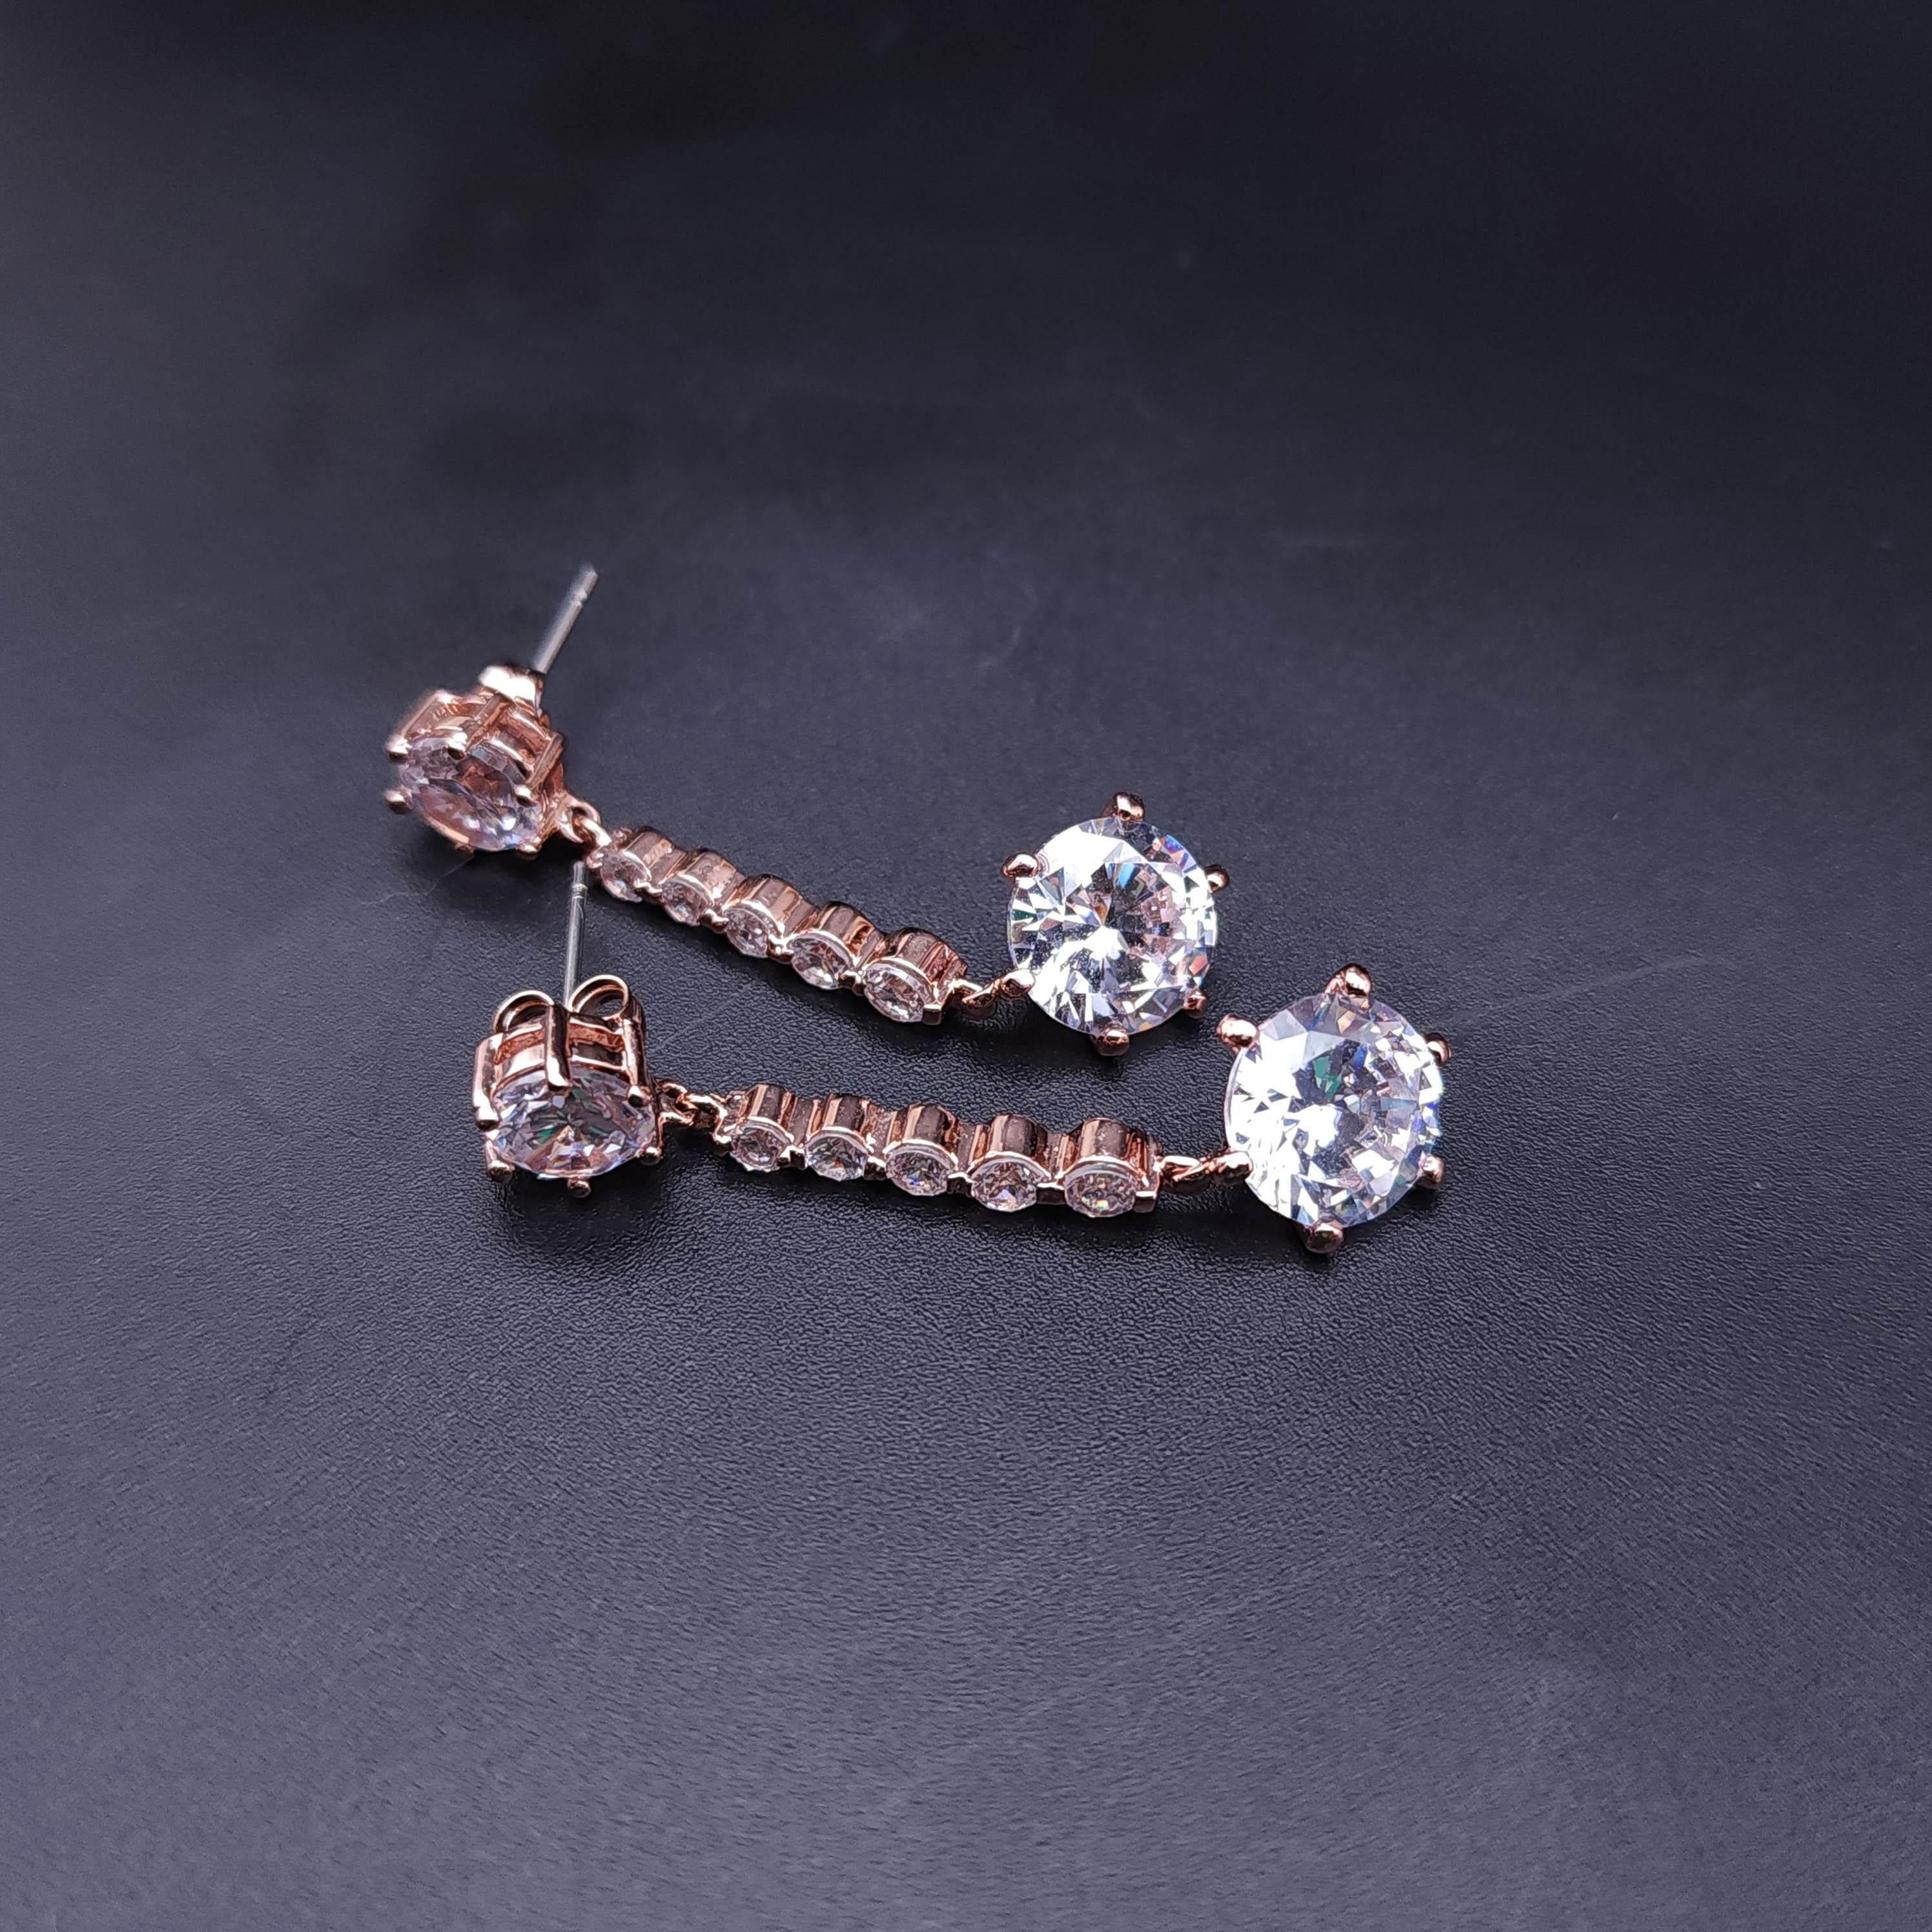 CZ Kenneth Jay Lane Rose Gold Crystal Dangle Earrings, Prong Set Cubic Zirconia In New Condition For Sale In Milford, DE